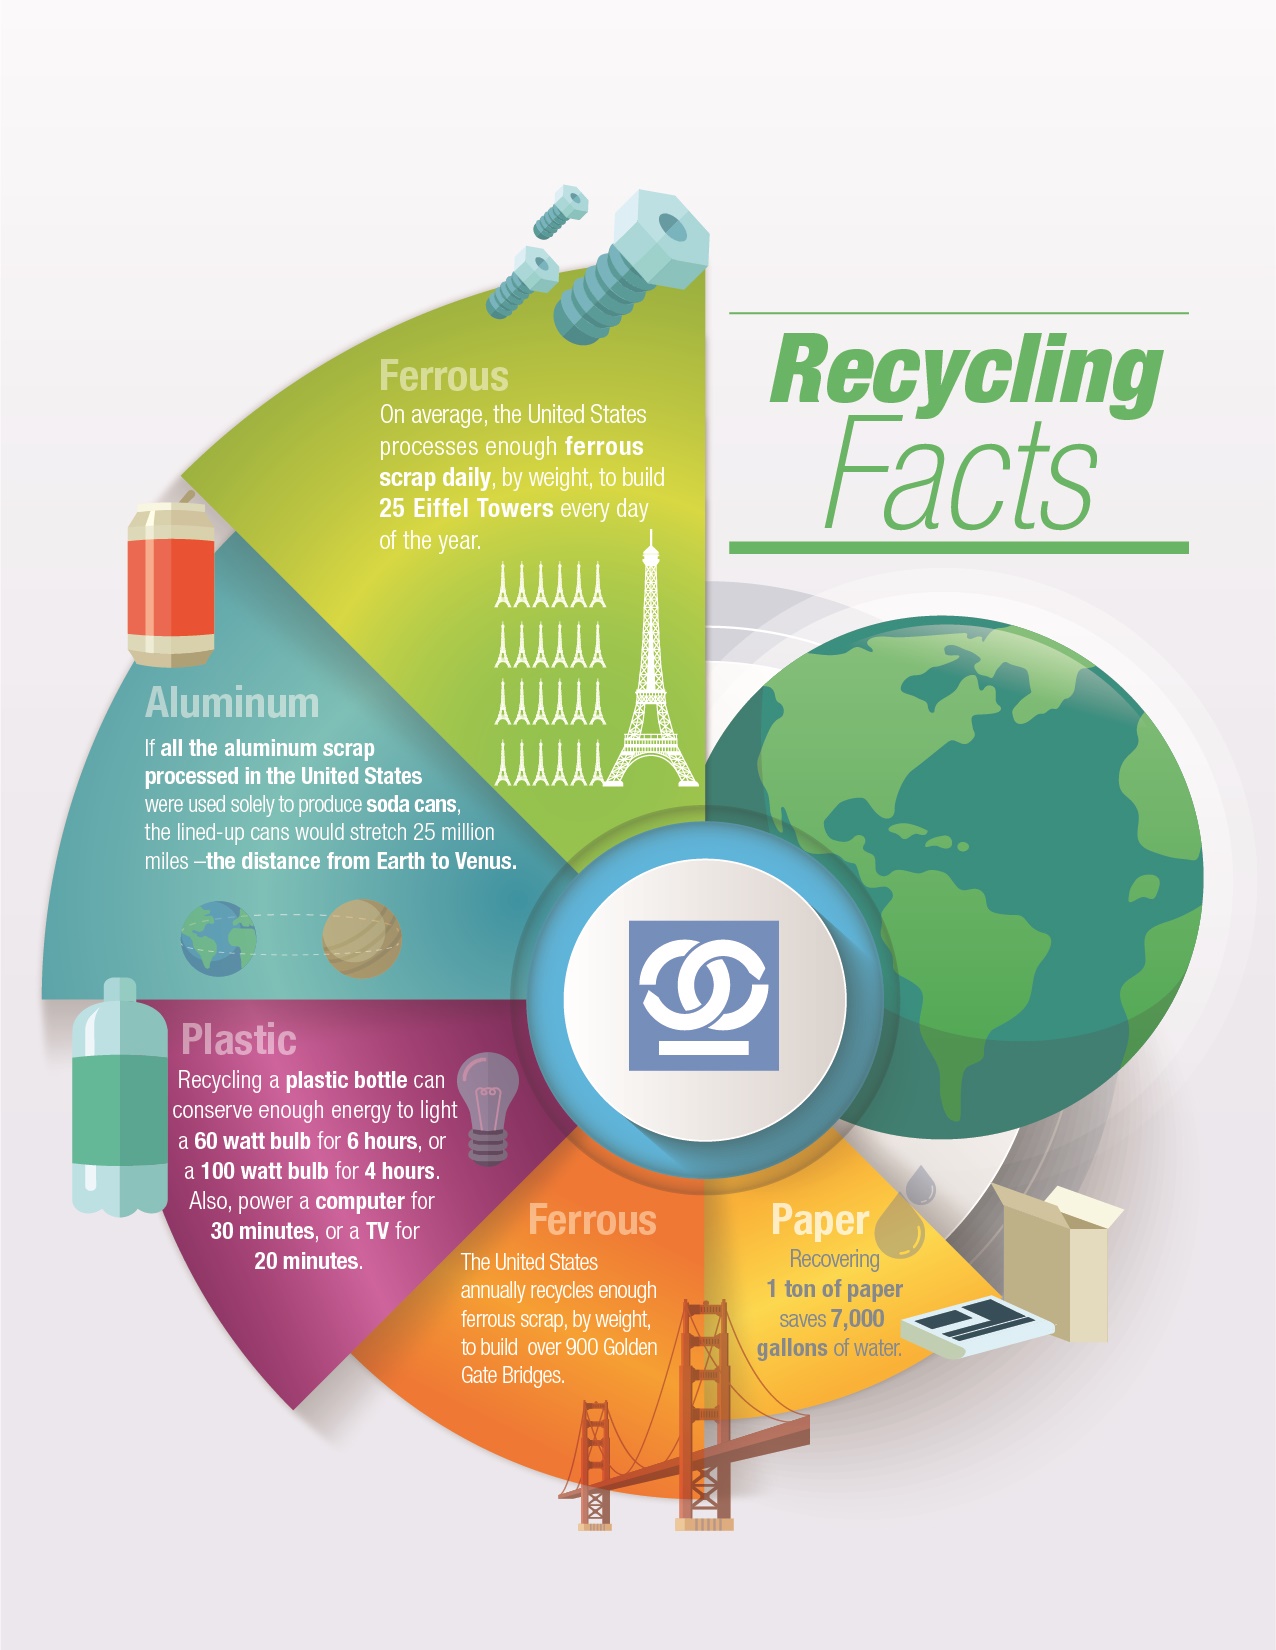 Recycling works in a number of different ways to benefit the environment.